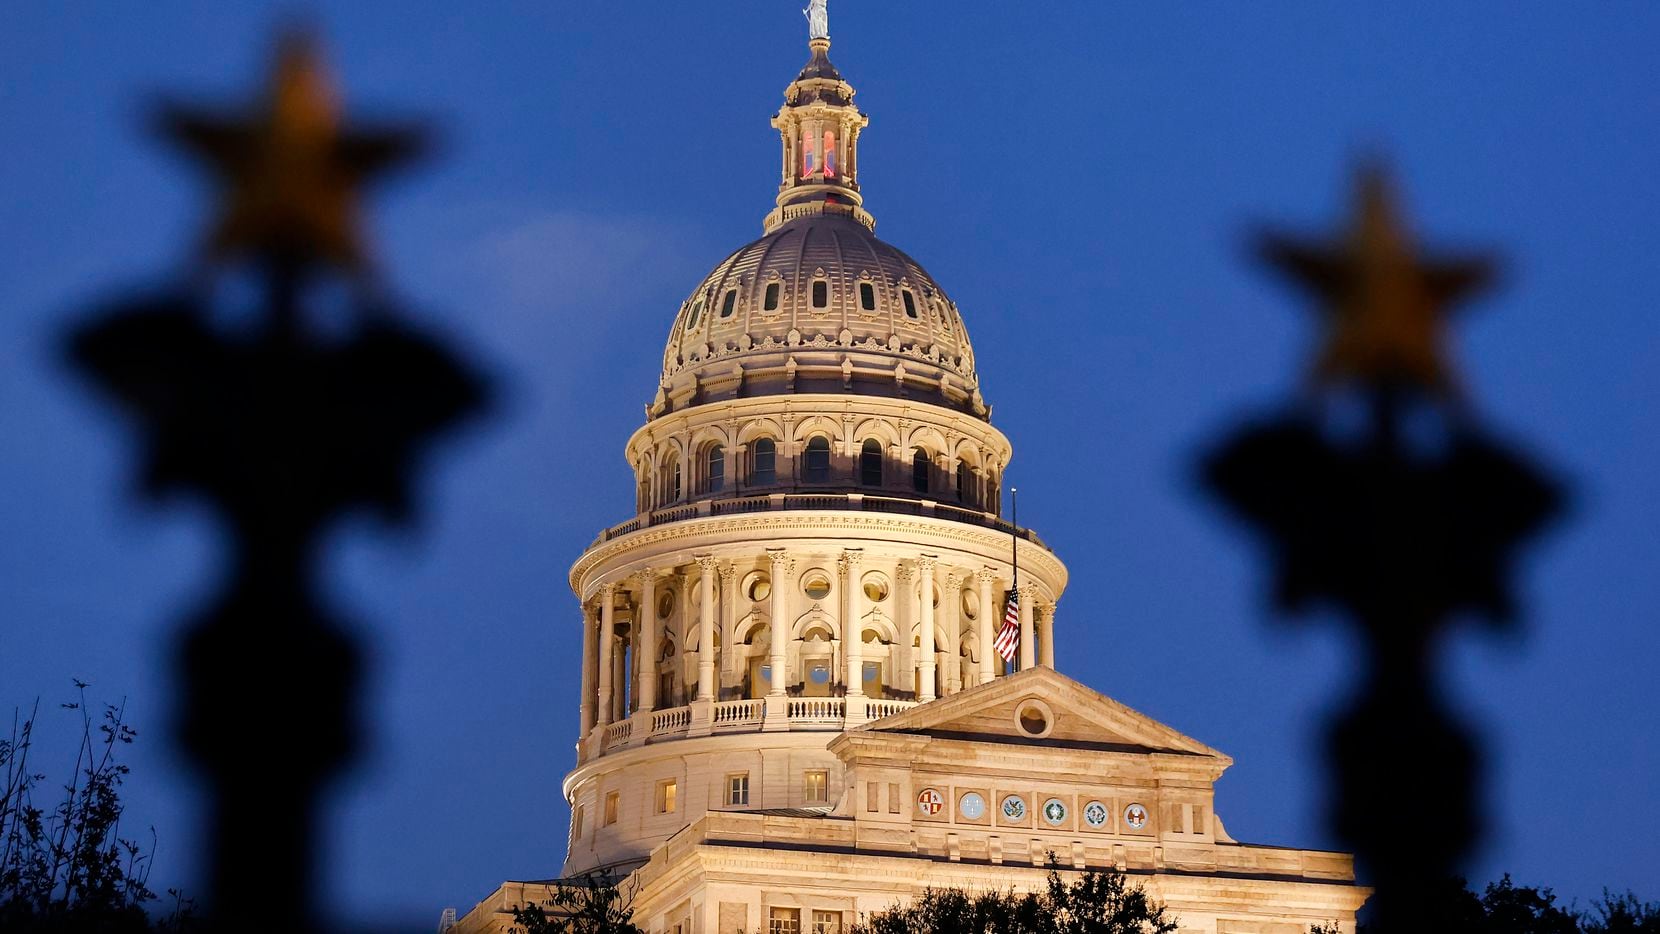 The Texas State Capitol is pictured at dusk in Austin, Texas, Thursday, December 9, 2021.